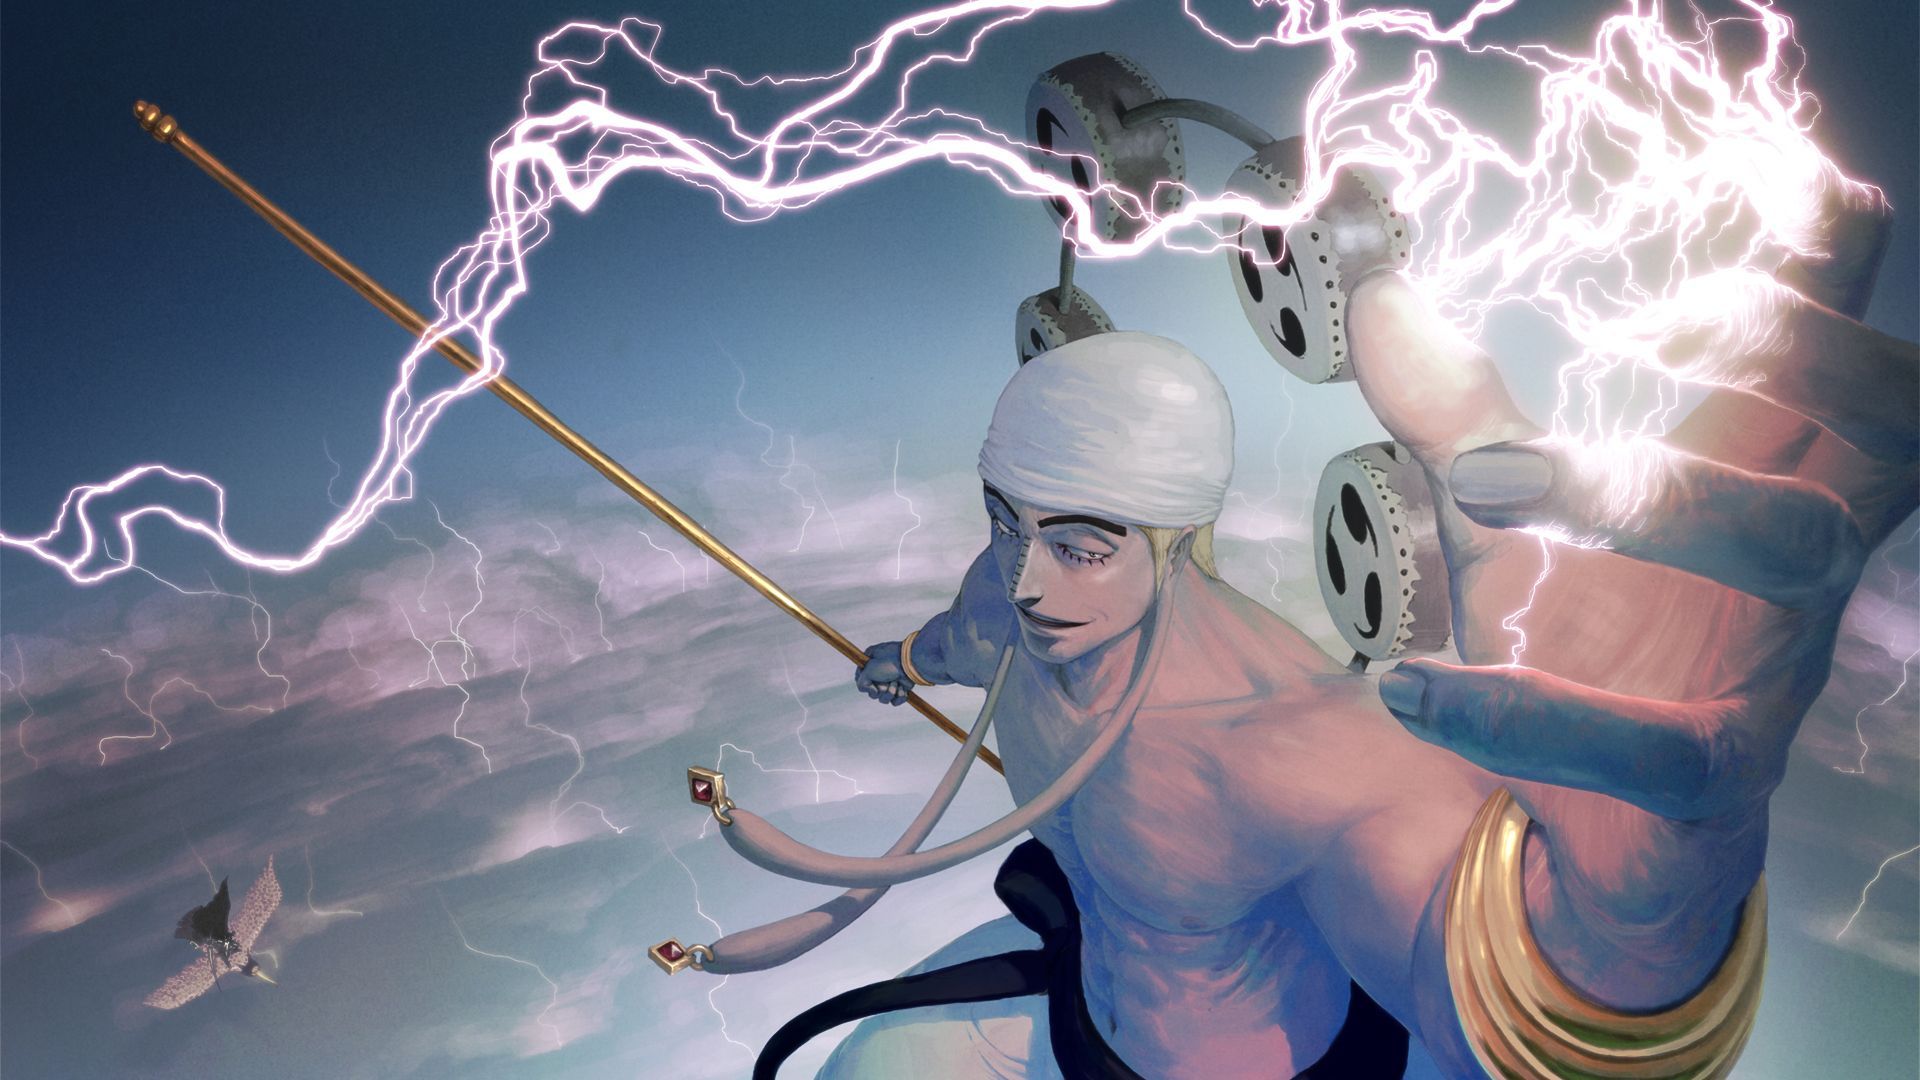 god-enel-anime-lightning-one-piece-picture-hd-1920x1080.jpg